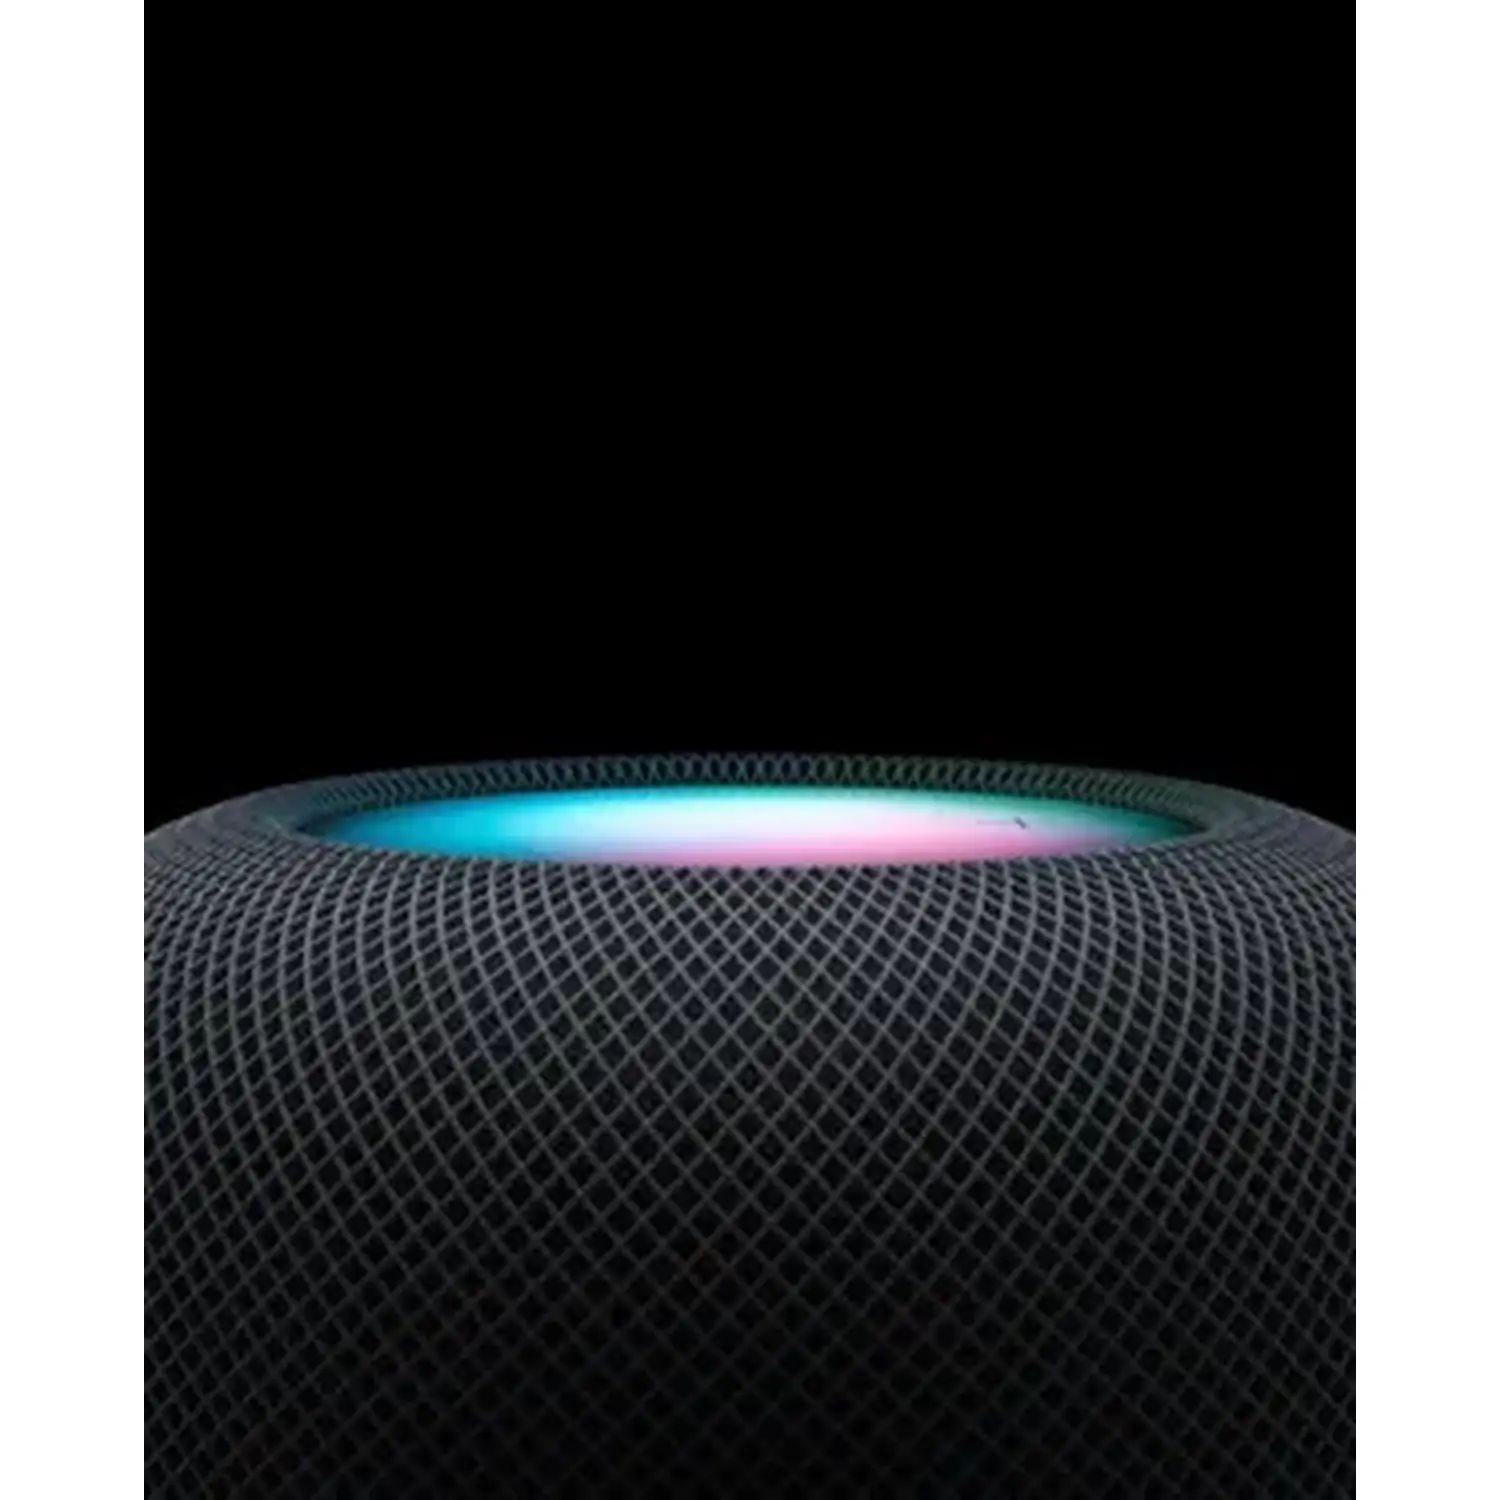 Buy Apple Homepod 2: Smart Music Listening Sweet Spot with Clear Vocals